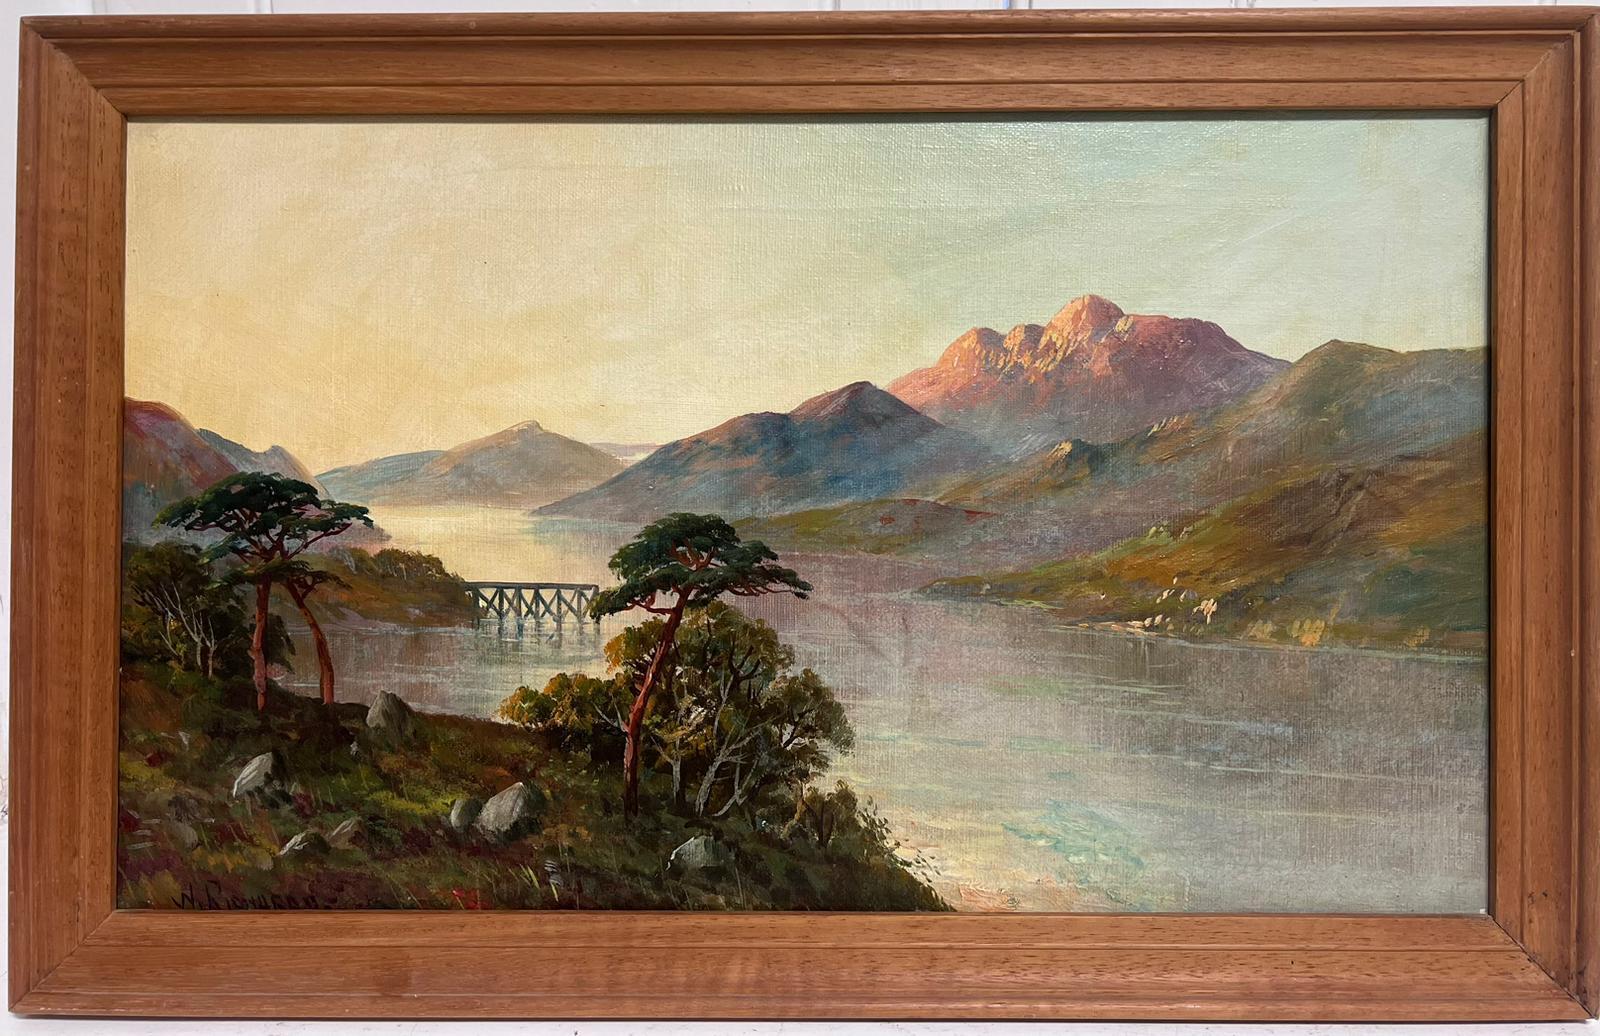 Loch Lomond Scotland Antique Scottish Highland Loch Sunset Oil Painting - Brown Landscape Painting by Francis E. Jamieson